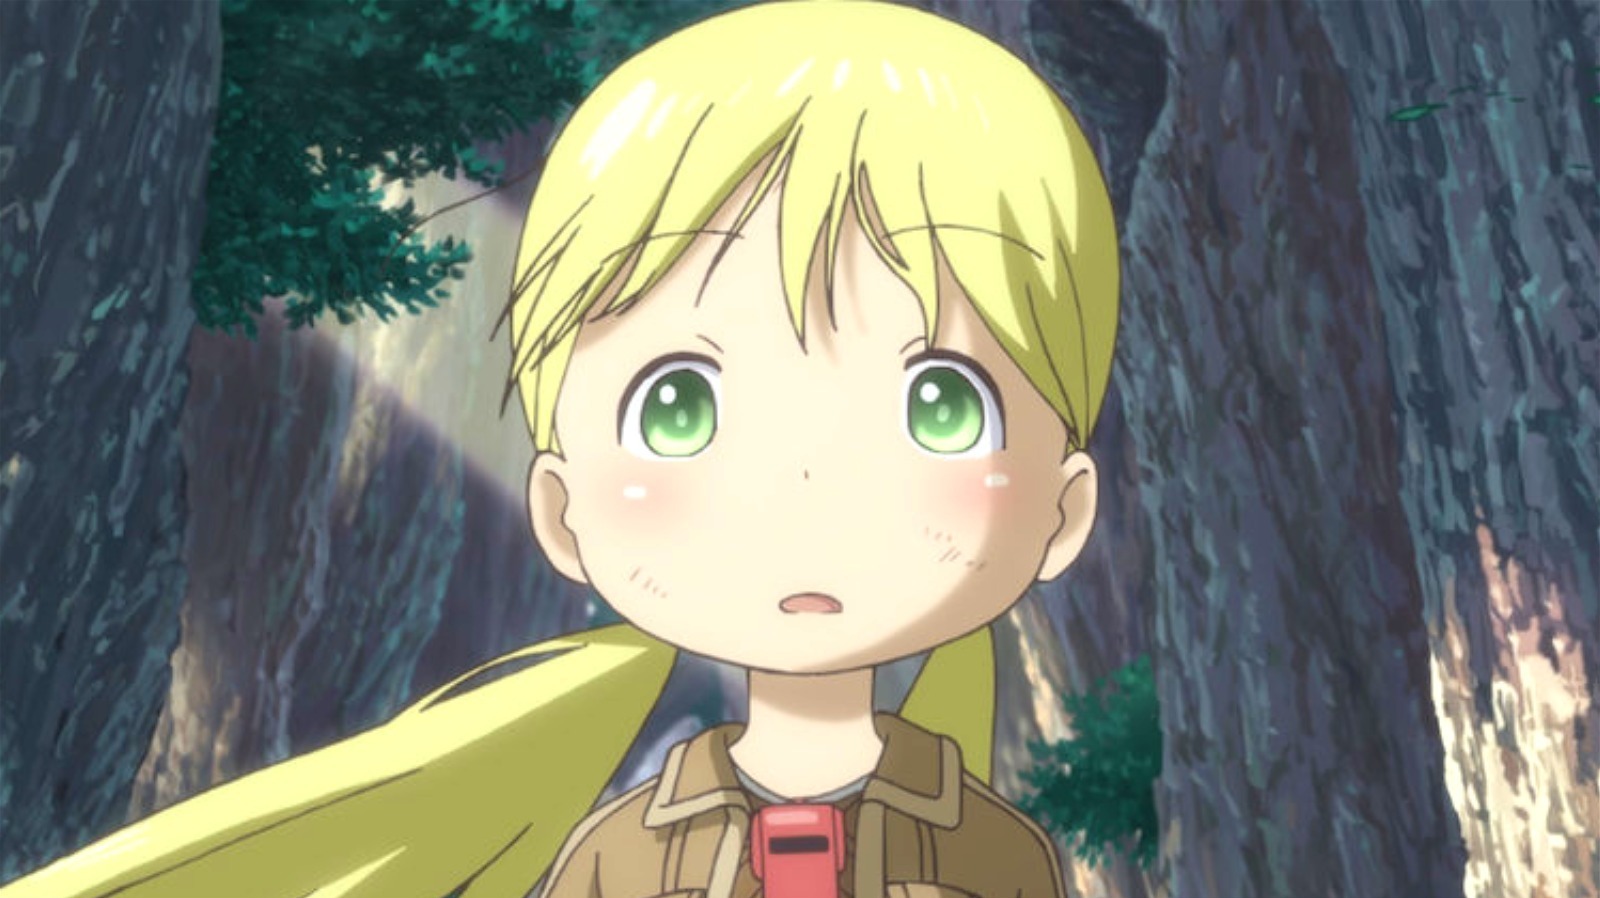 When Does 'Made In Abyss' Season 2 Come Out and How to Watch It